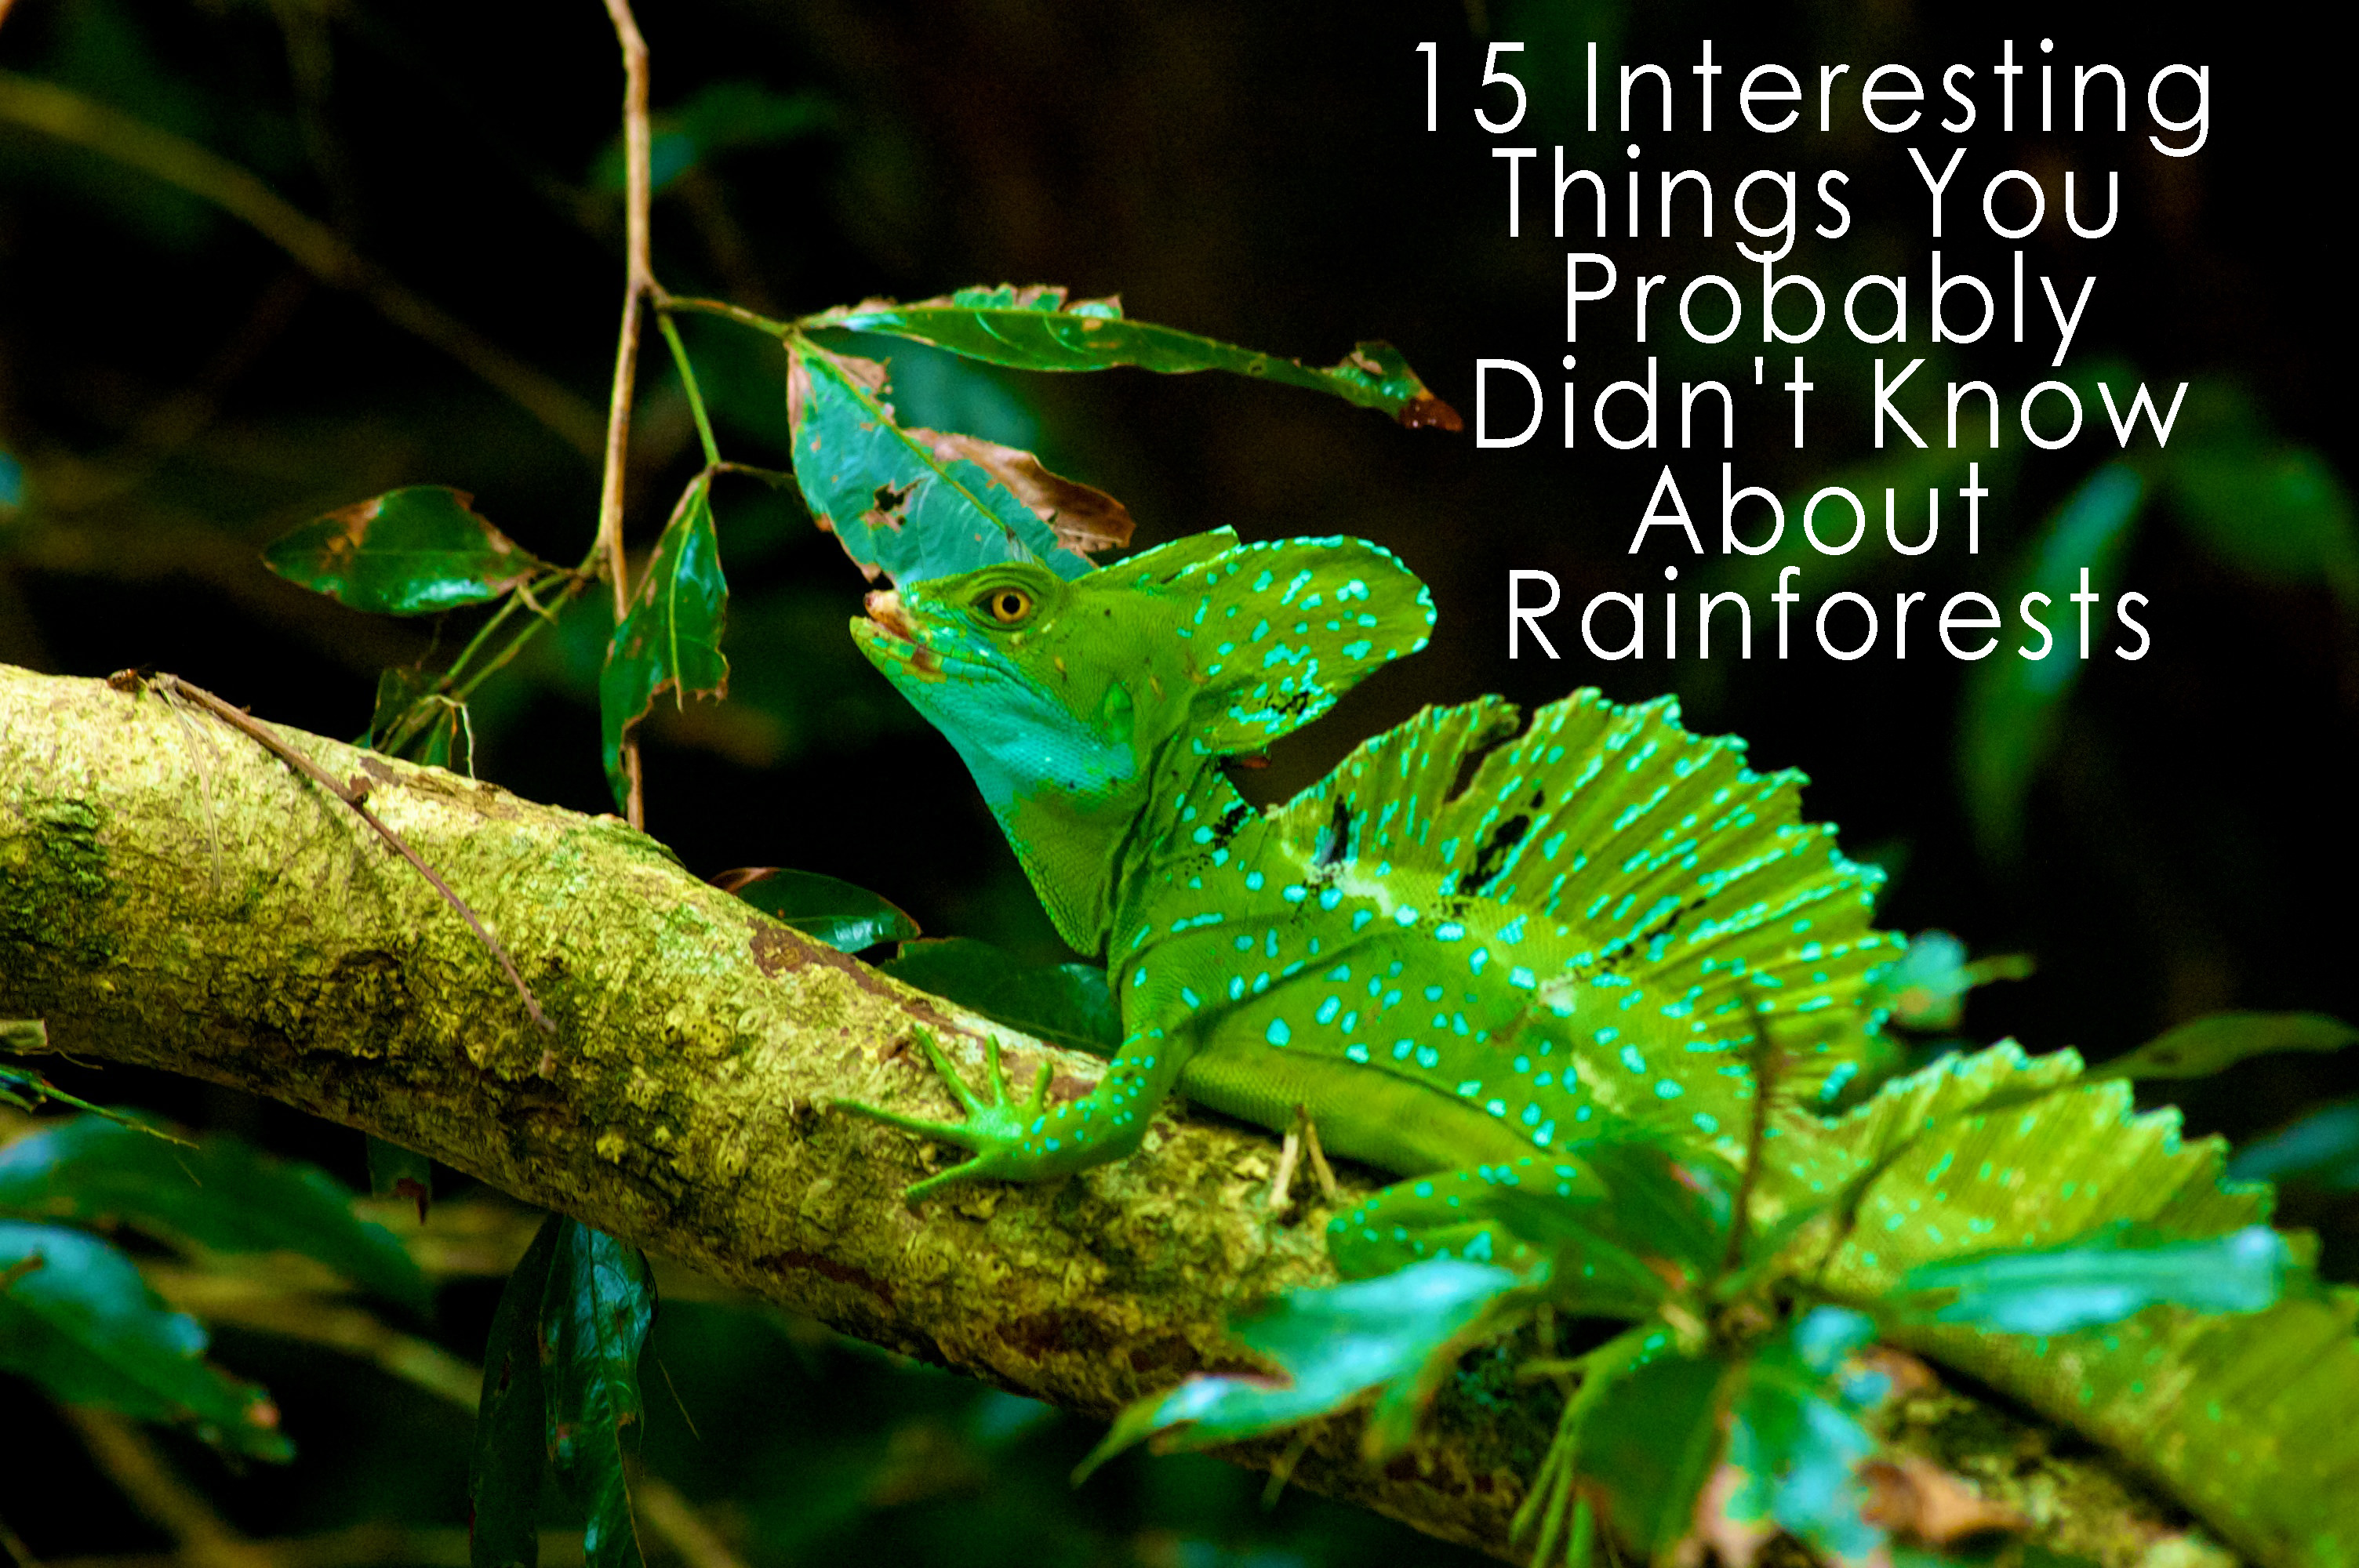 An Interesting Historic Facts About Rainforests